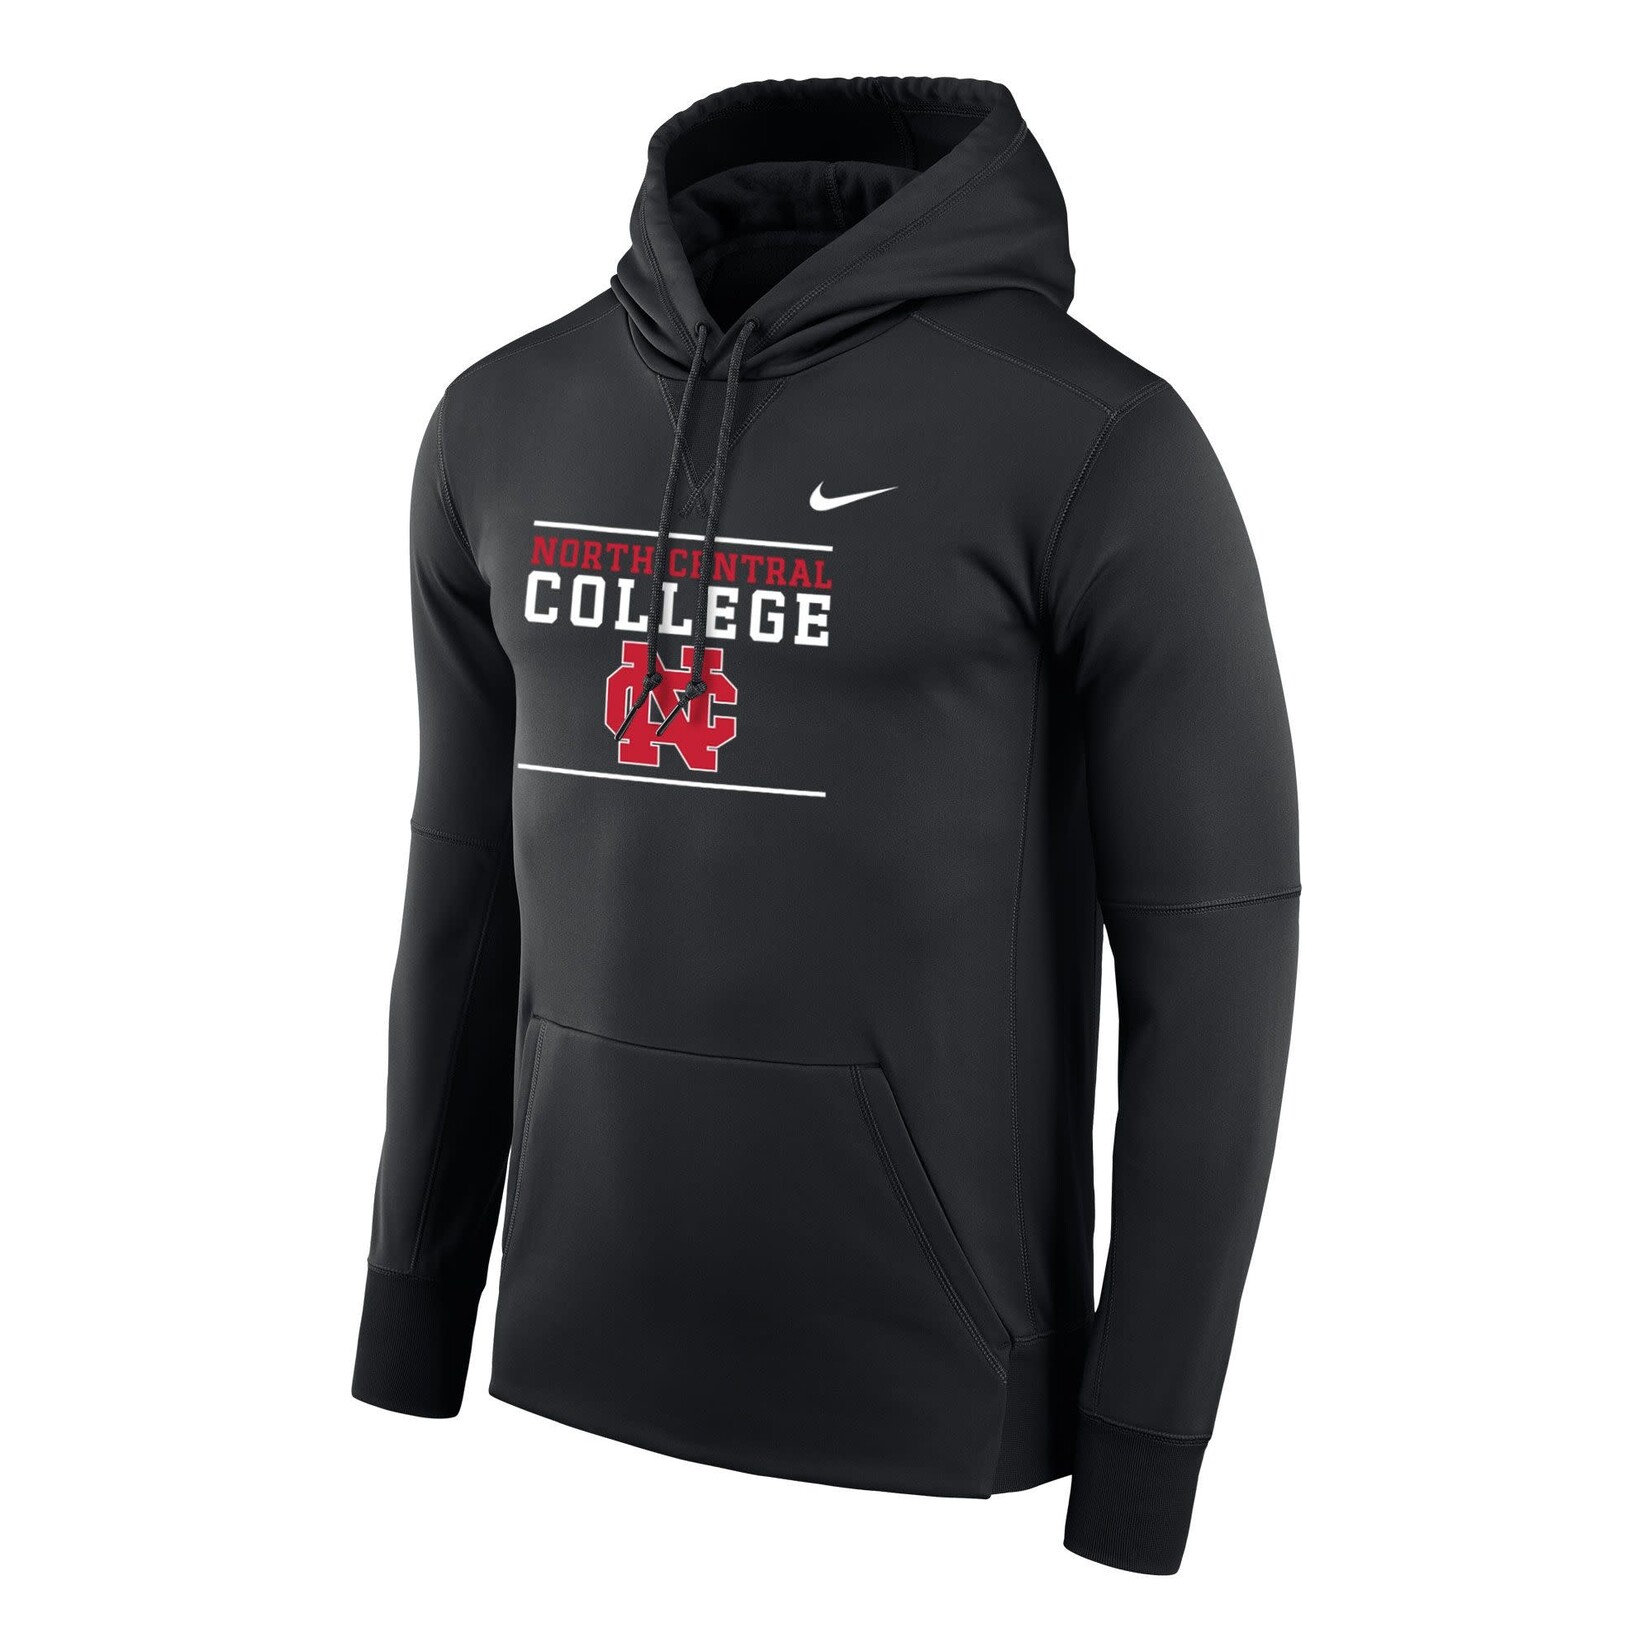 Nike North Central College Black F23 Therma Hoodie by Nike